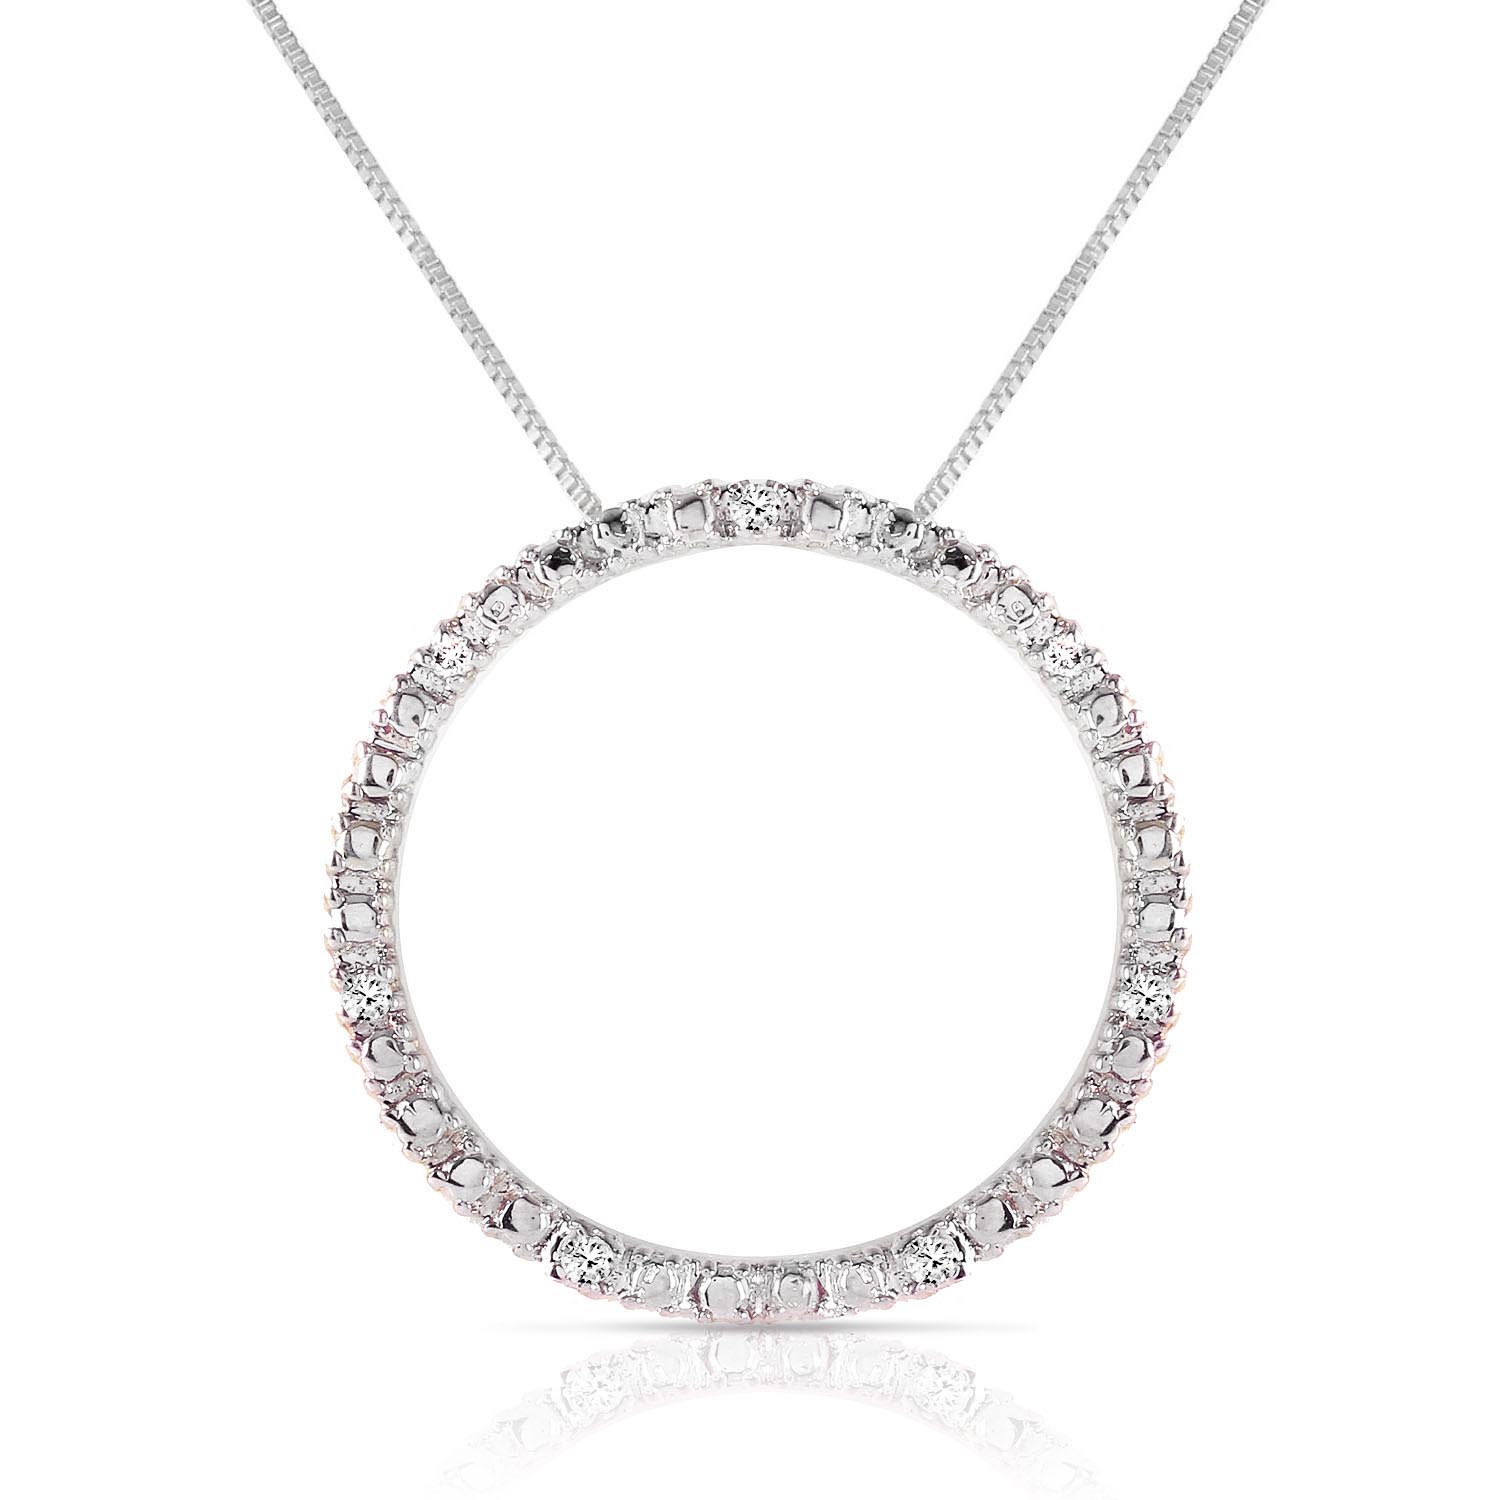 Diamond Circle of Life Pendant Necklace 0.1 ctw in 9ct White Gold